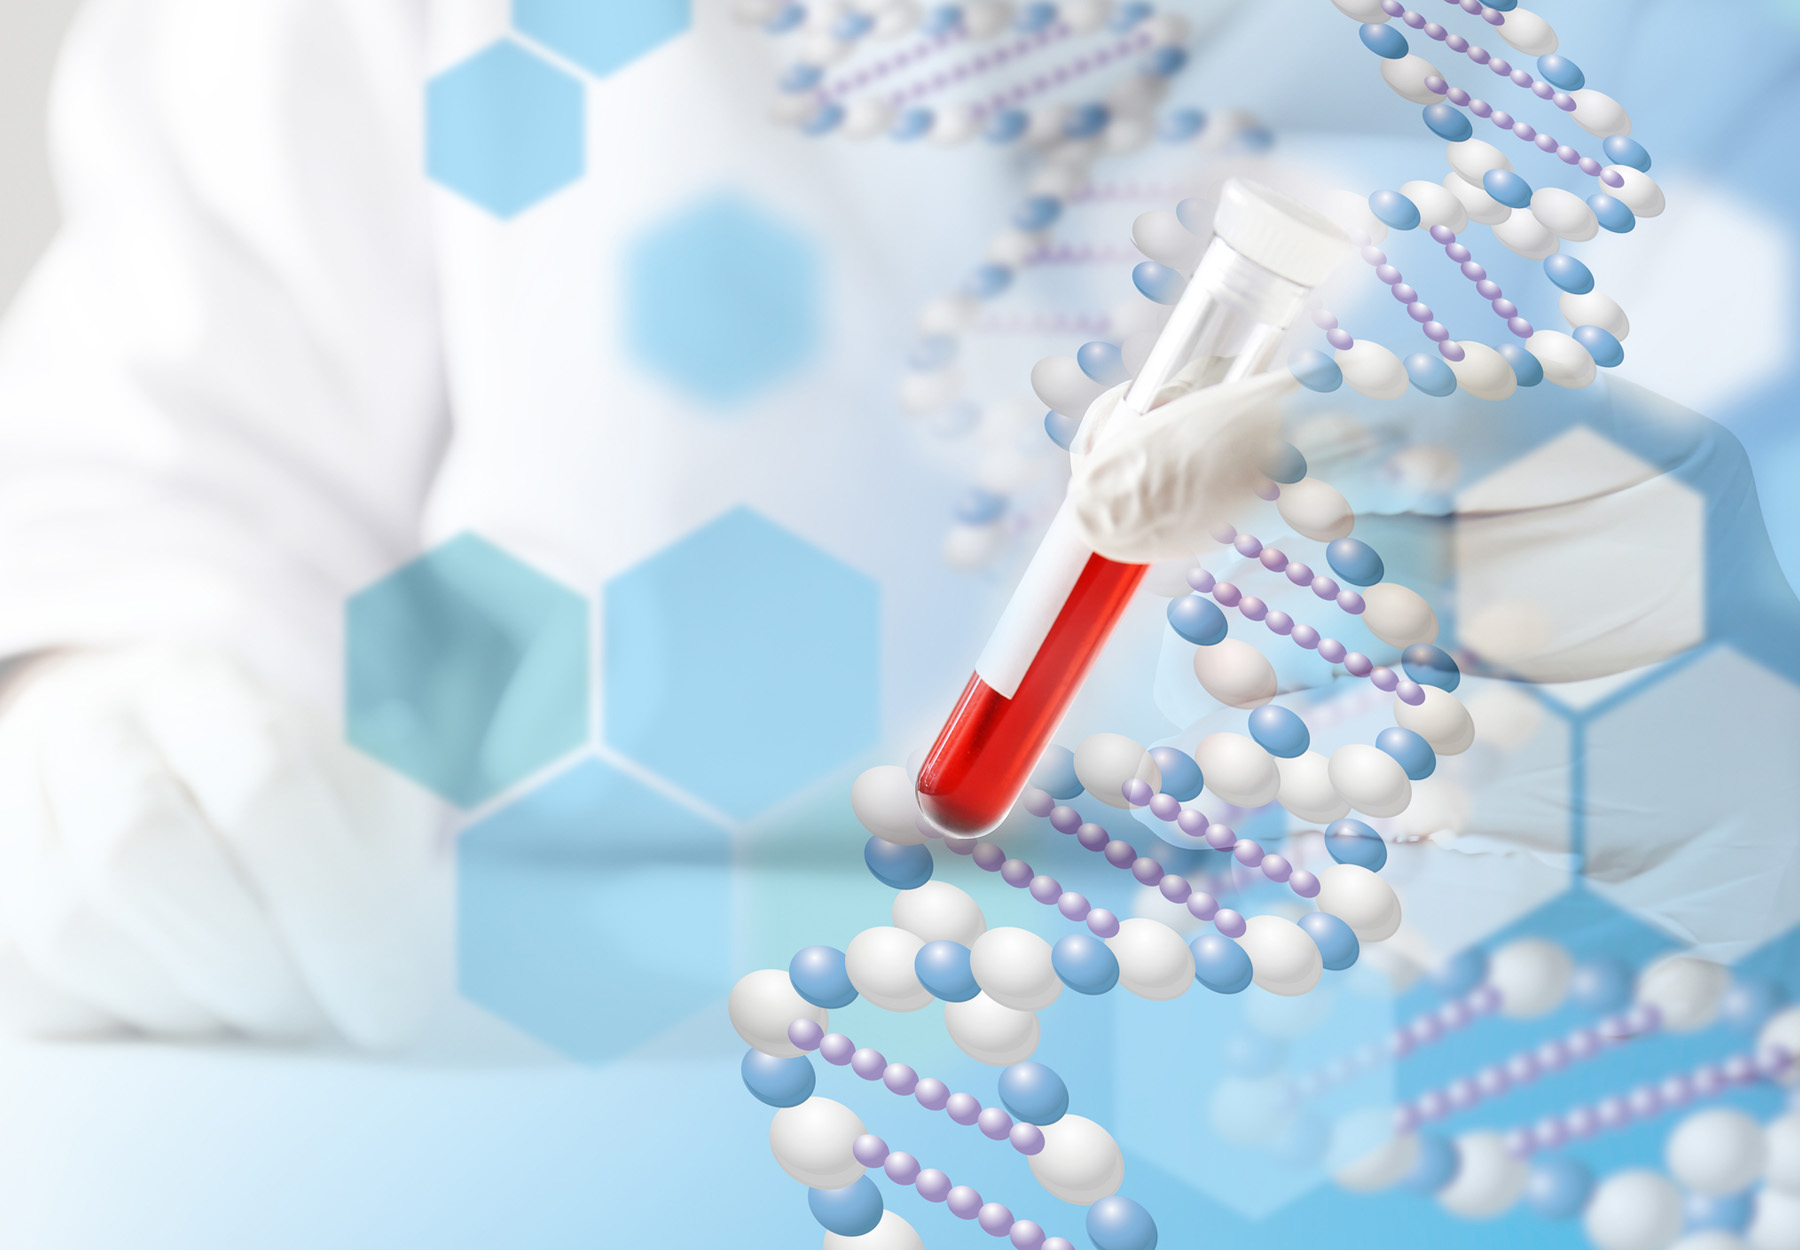 Photo illustration of test tube with blood, with a blue and white DNA helix over top and pale blue-green hexagons to show cancer genomics testing